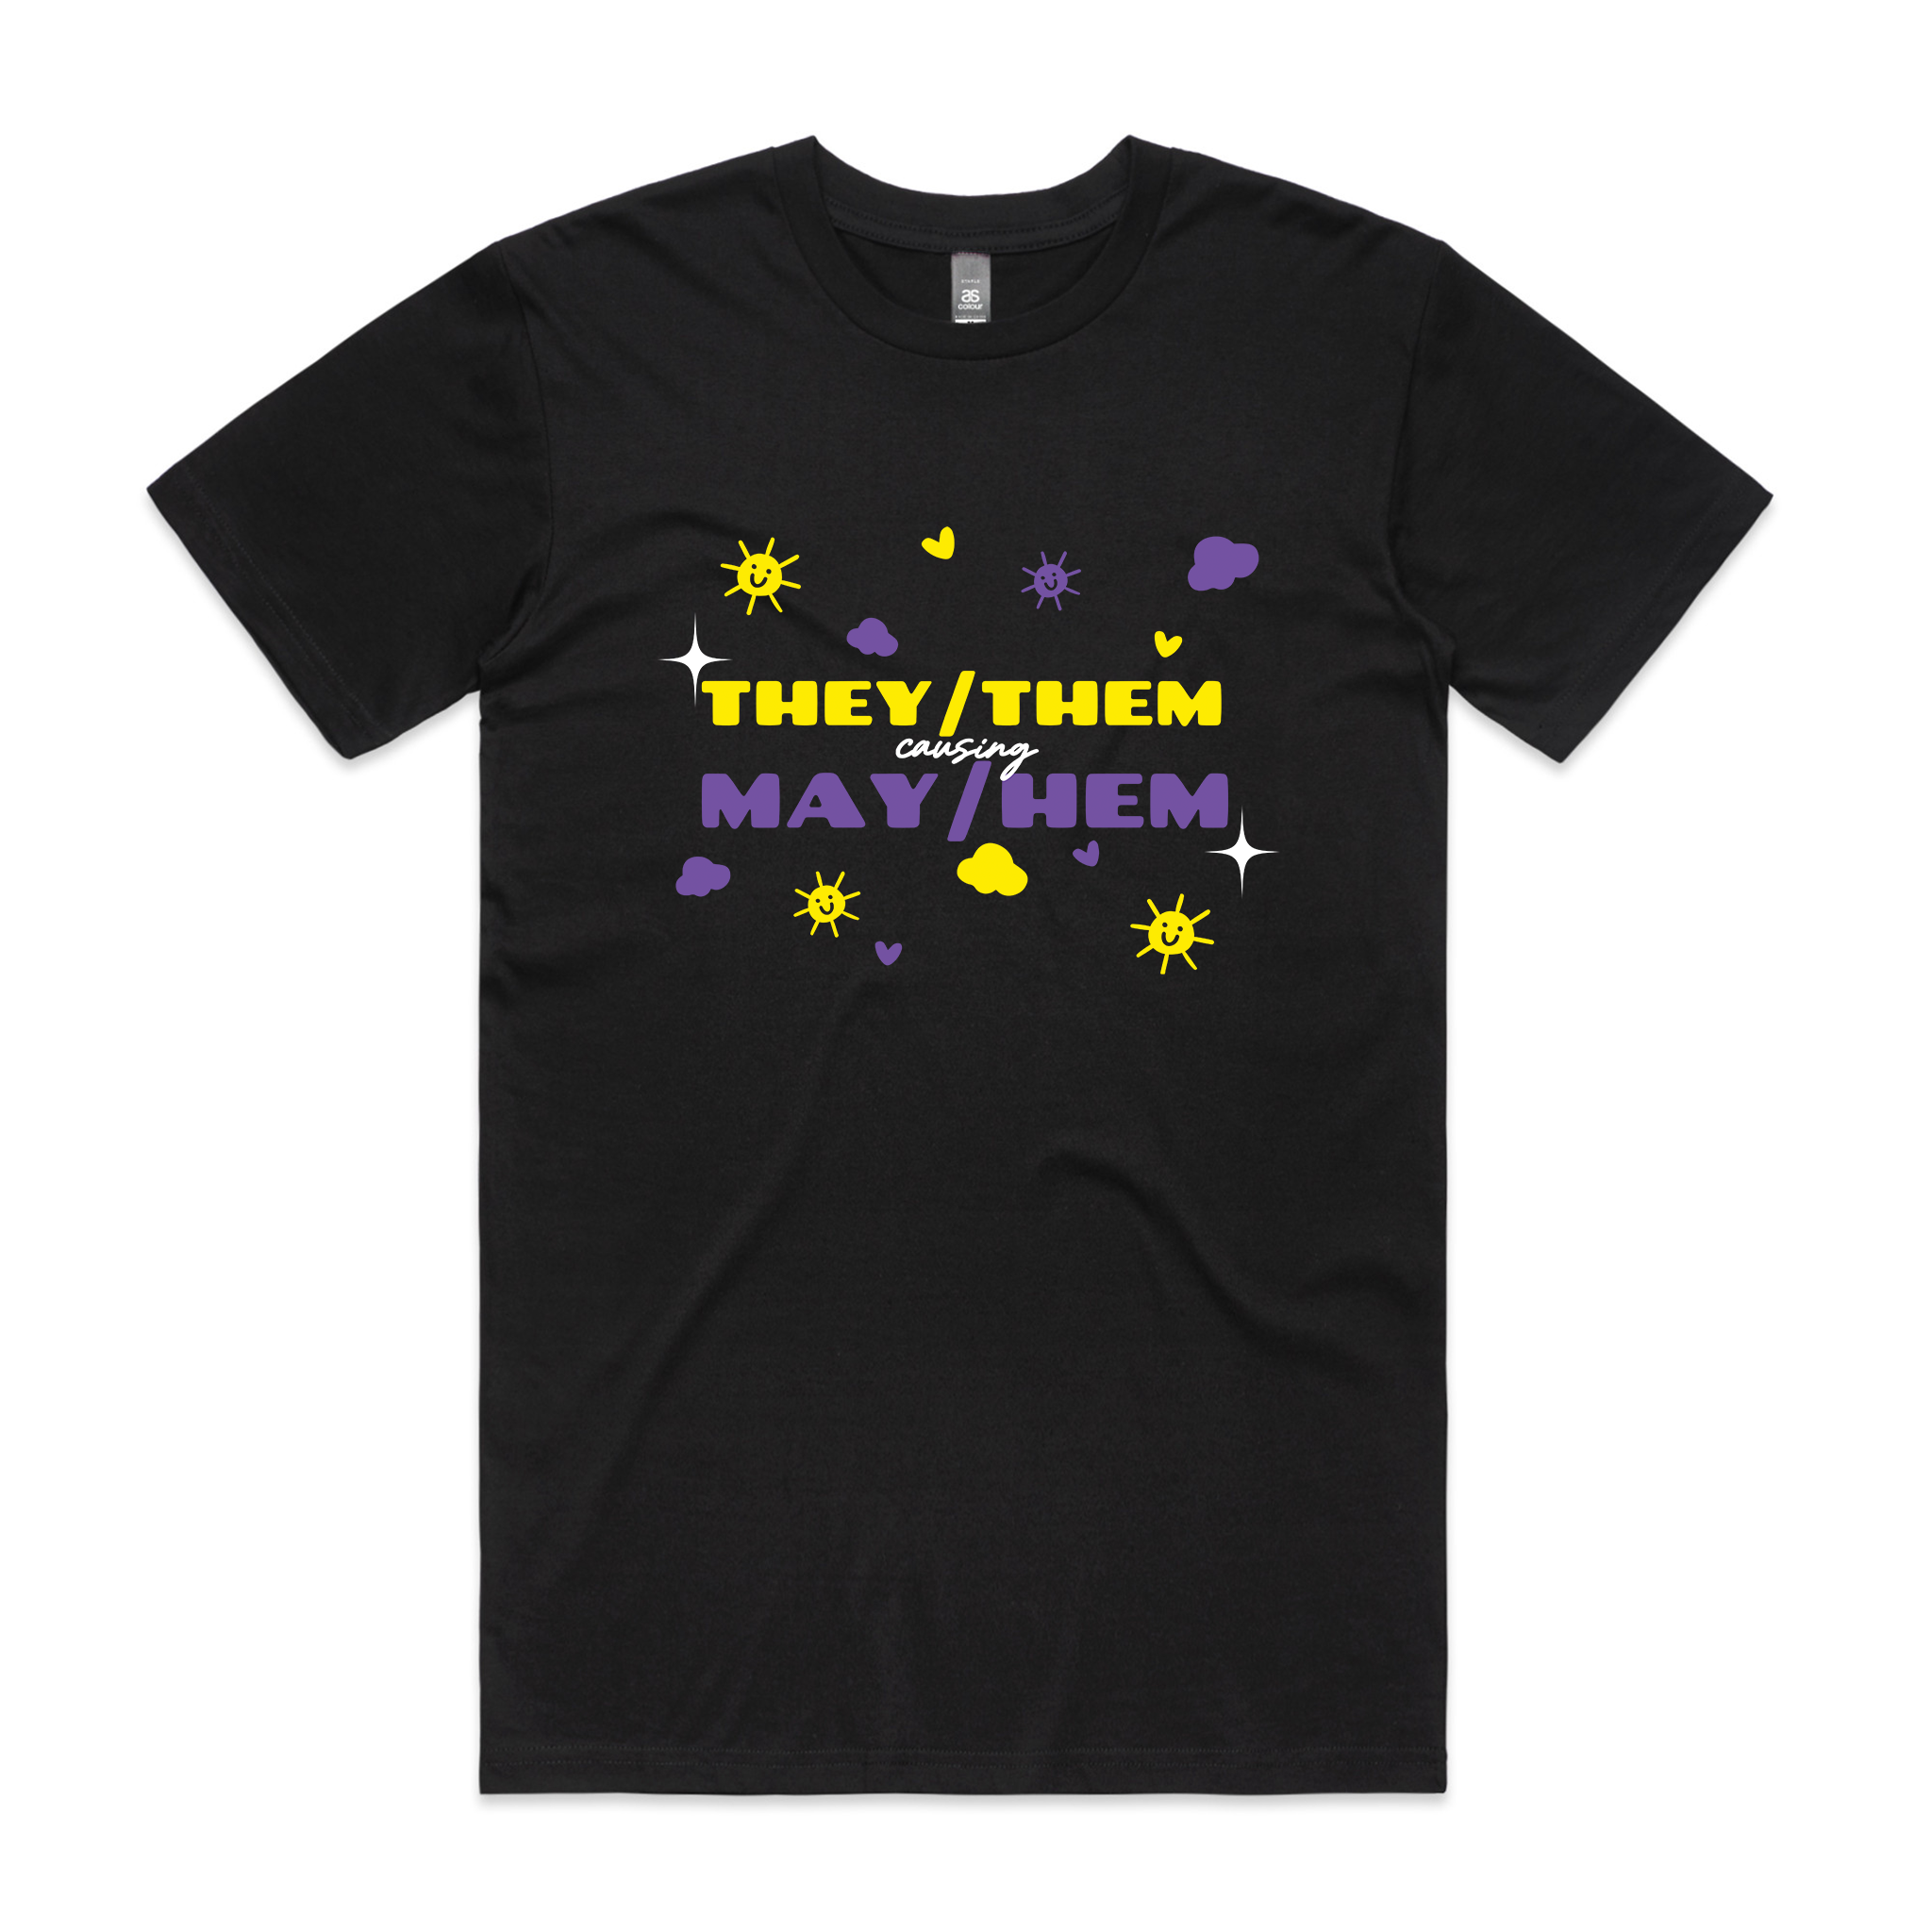 They/Them May/Hem Tee Ethically Made T-Shirts, Hoodies, Jumpers &amp; More!